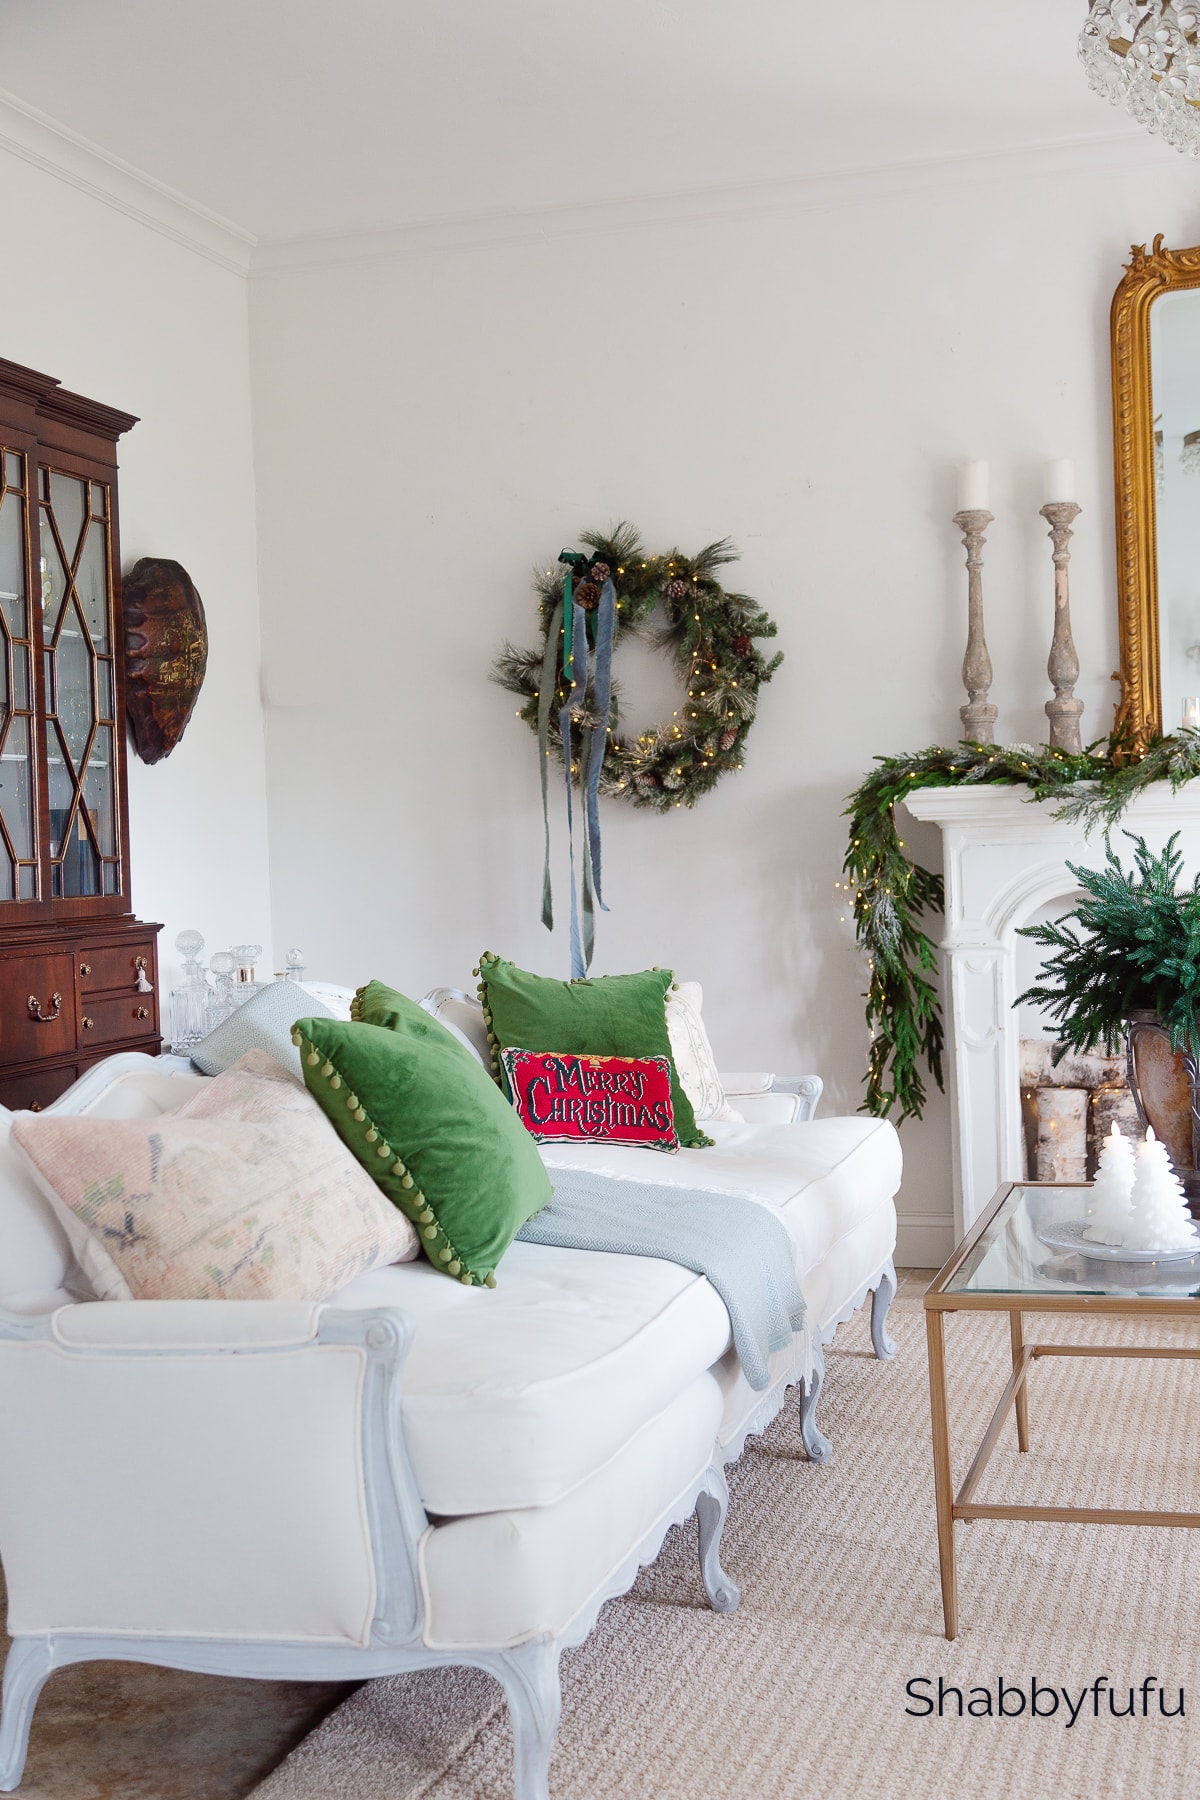 Transitional living room - decorate for Christmas 